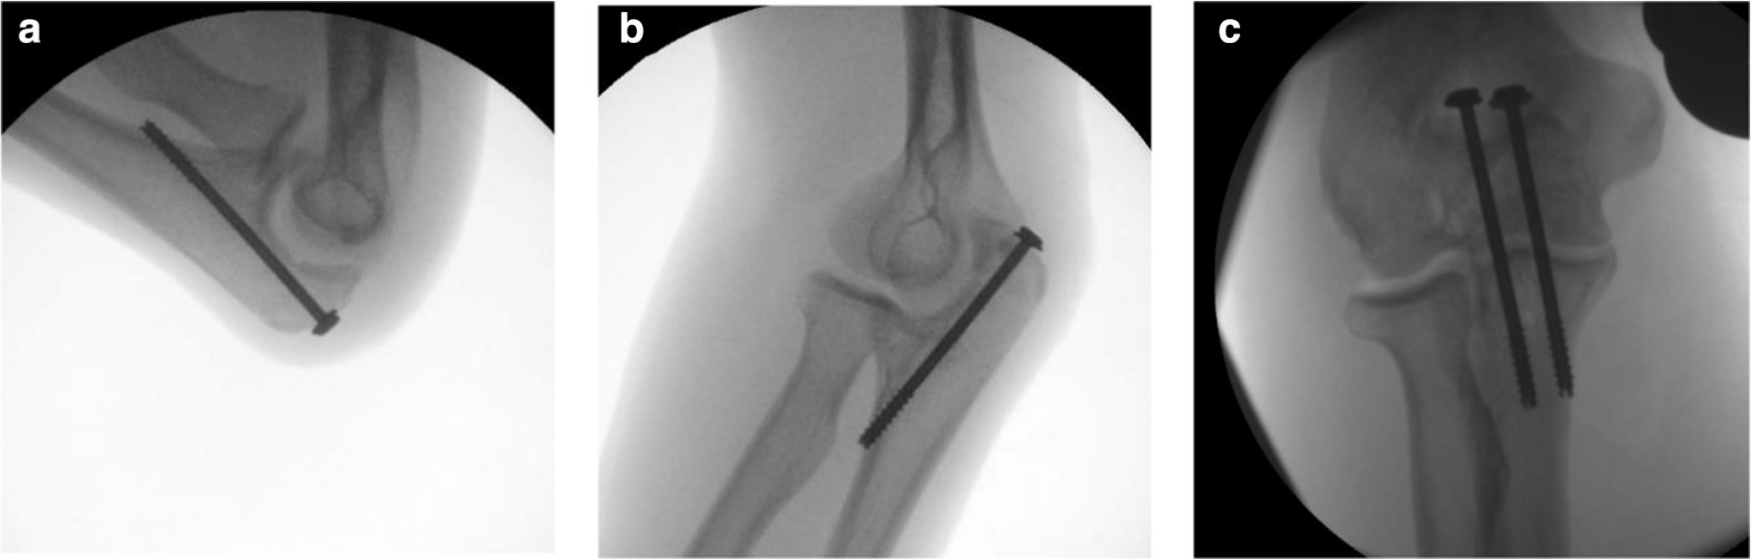 Fig. 2 
            Intra-operative assessment of fracture bicortical screw fixation stability with image intensifier: a) flexion; b) extension; c) anteroposterior.
          